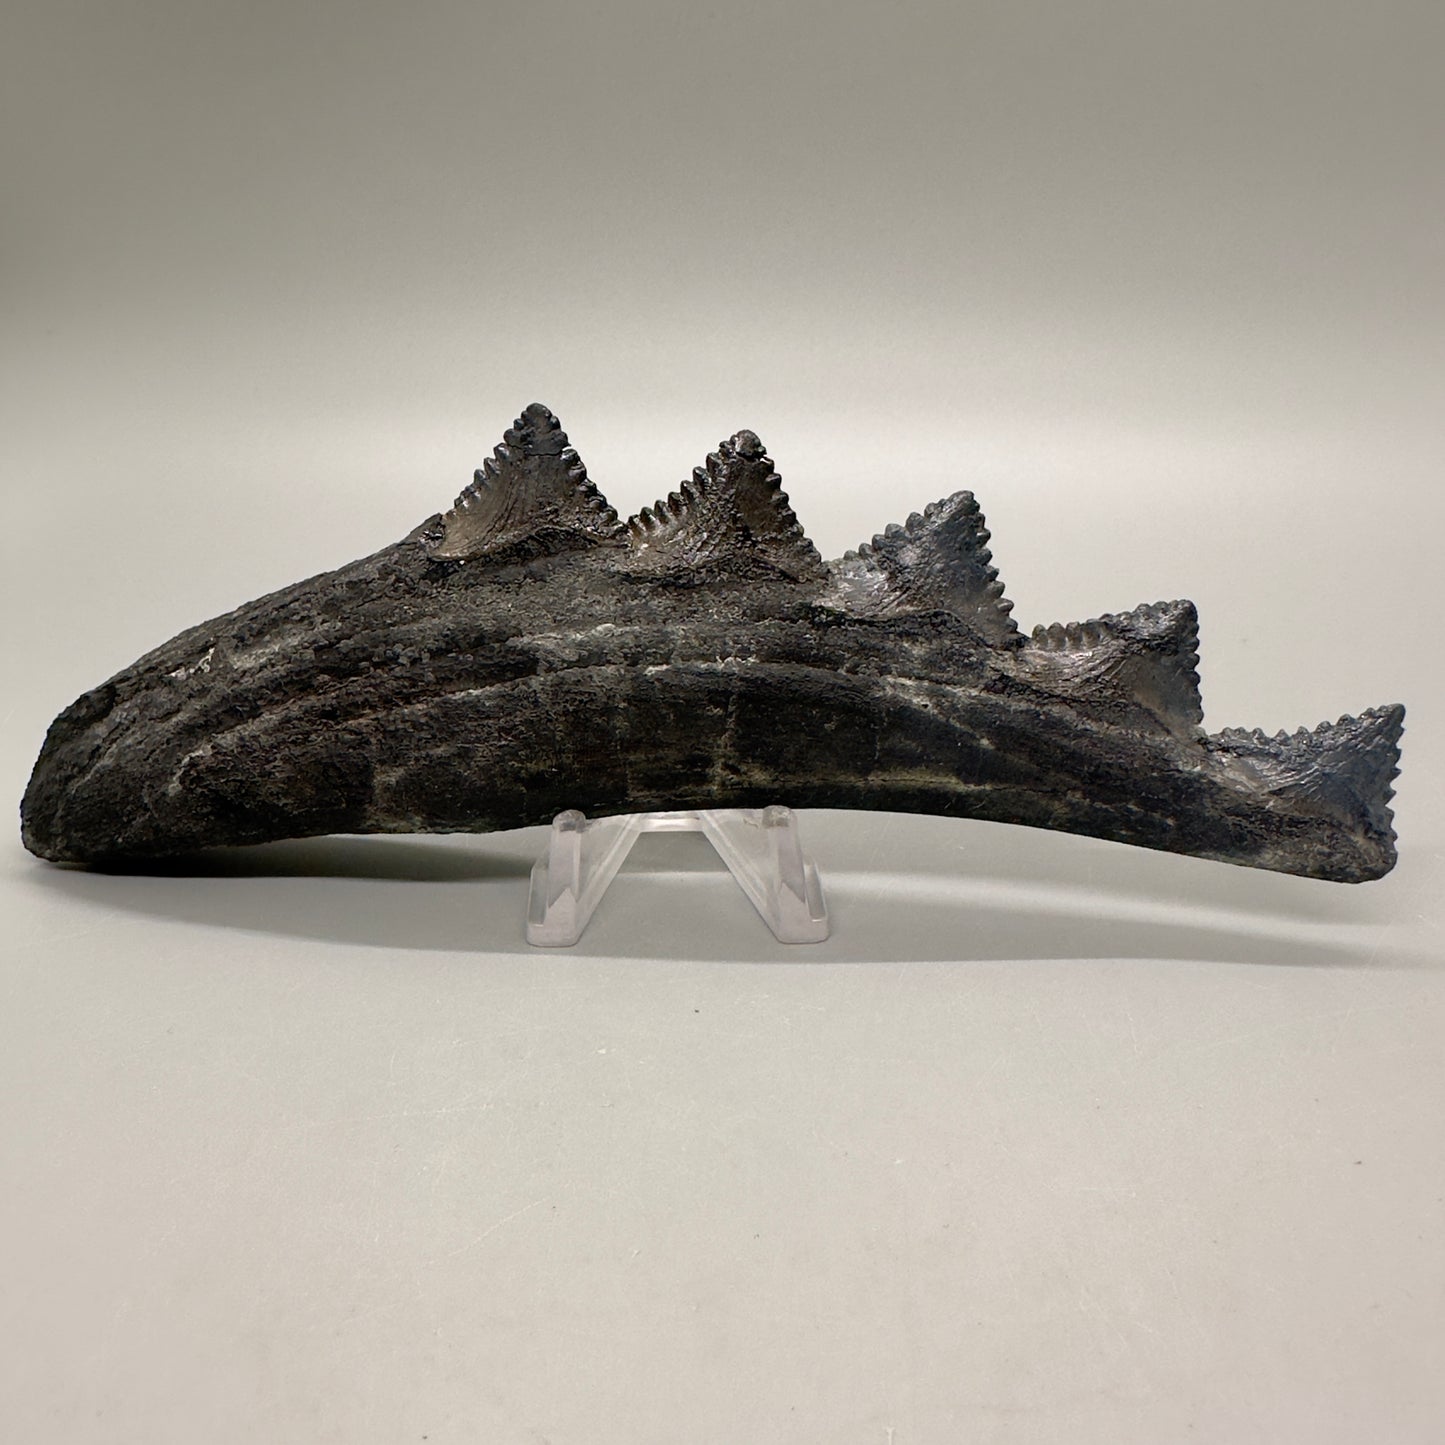 6.68" Fossil Extinct Eugeneodont - Edestus heinrichi shark Jaw, from Southern Illinois - Rare Specimen, 300 million years old R575 - Square photo back